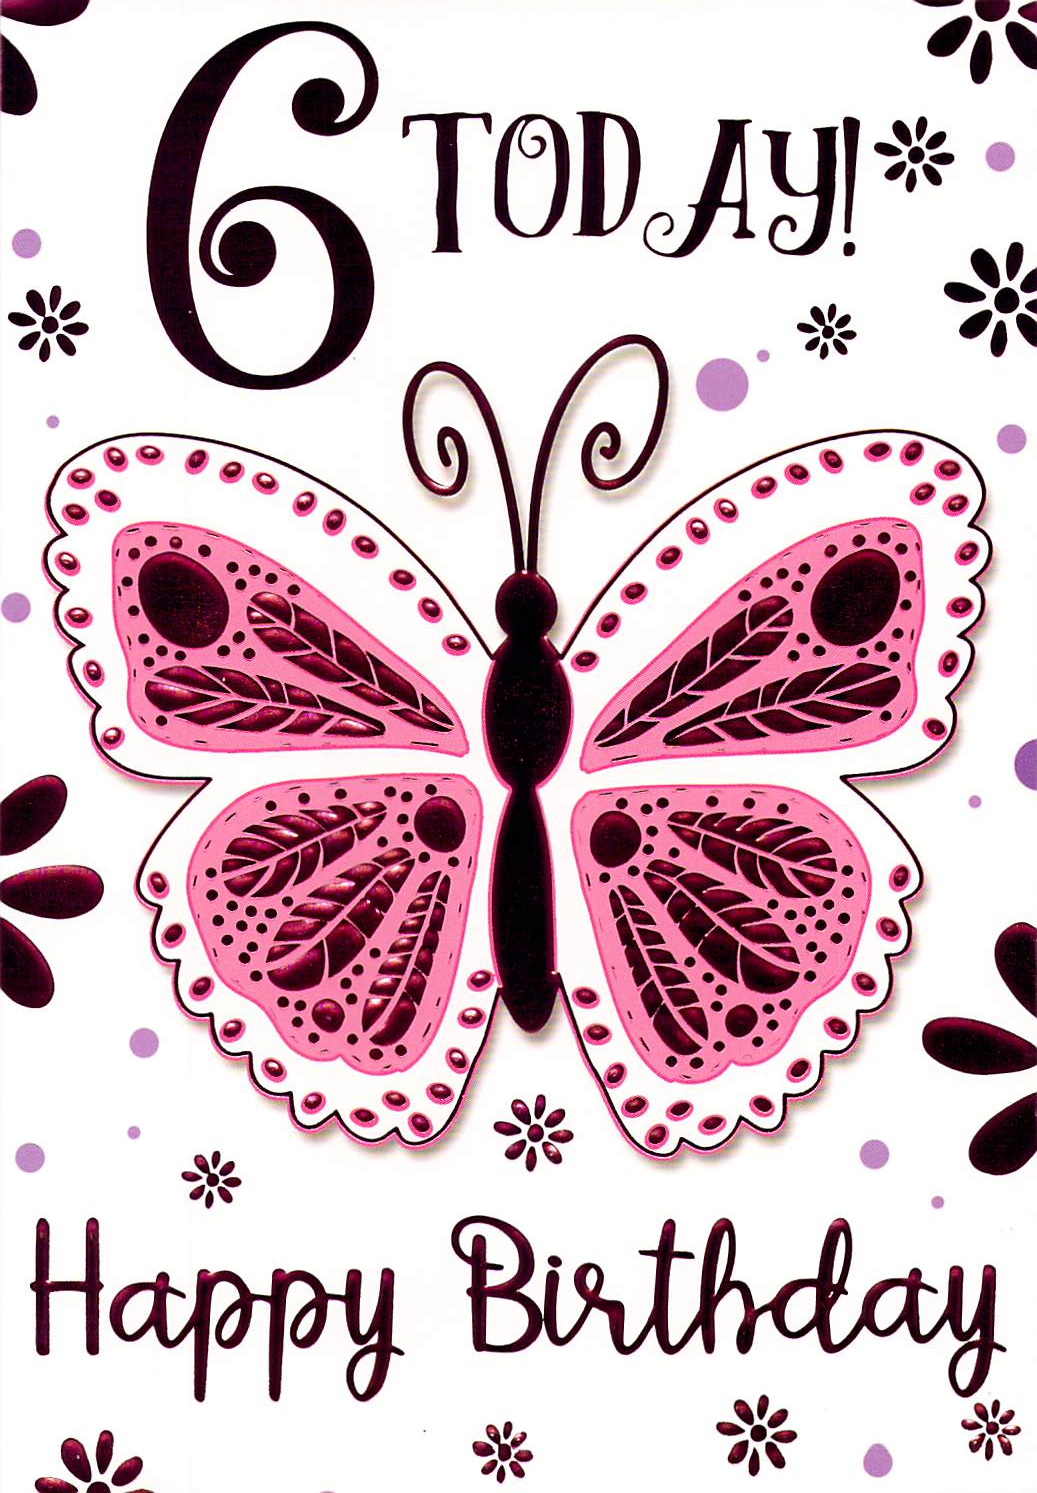 6th Birthday - Age 6 - Butterfly - Pink Foiled - Greeting Card